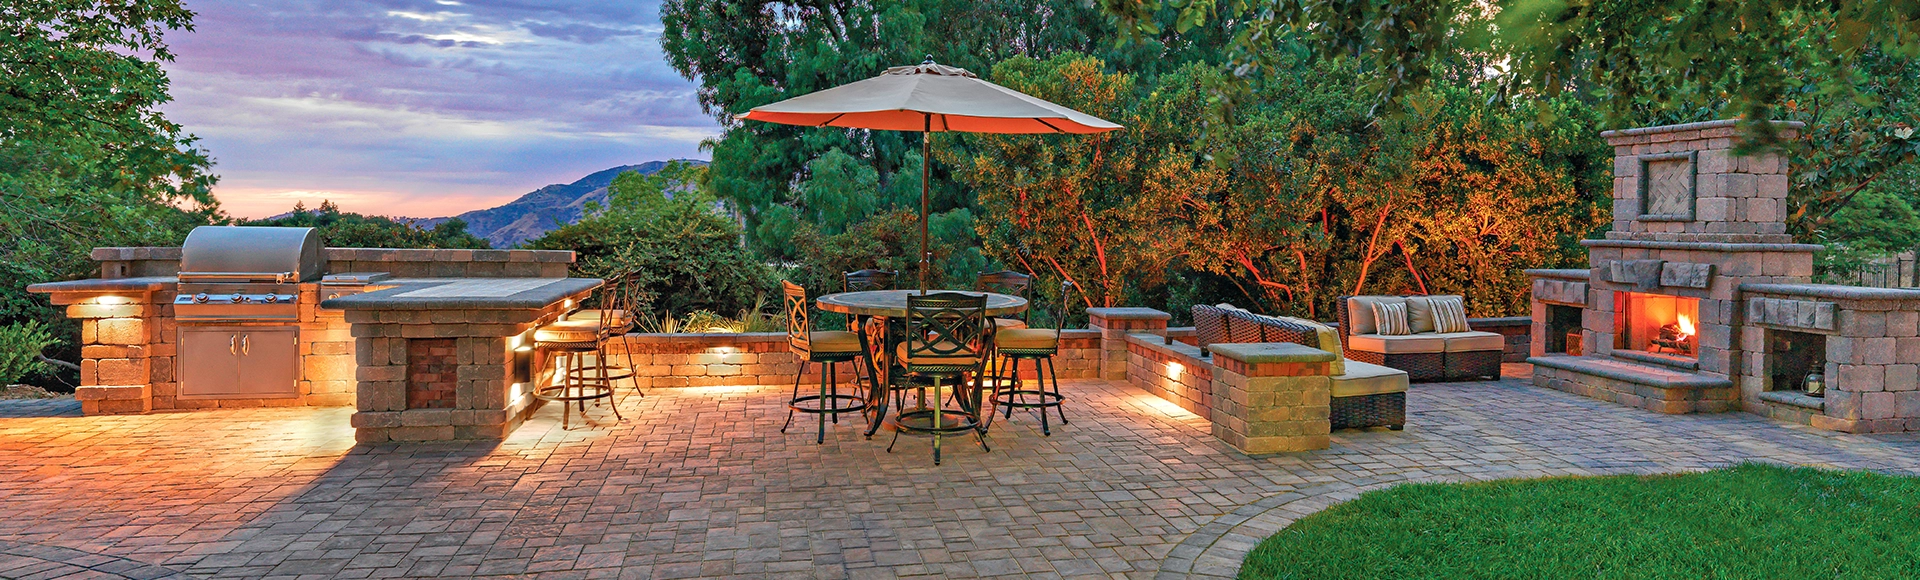 Incredible paver patio with built-in stone outdoor kitchen with grill and built-in outdoor fire place. 